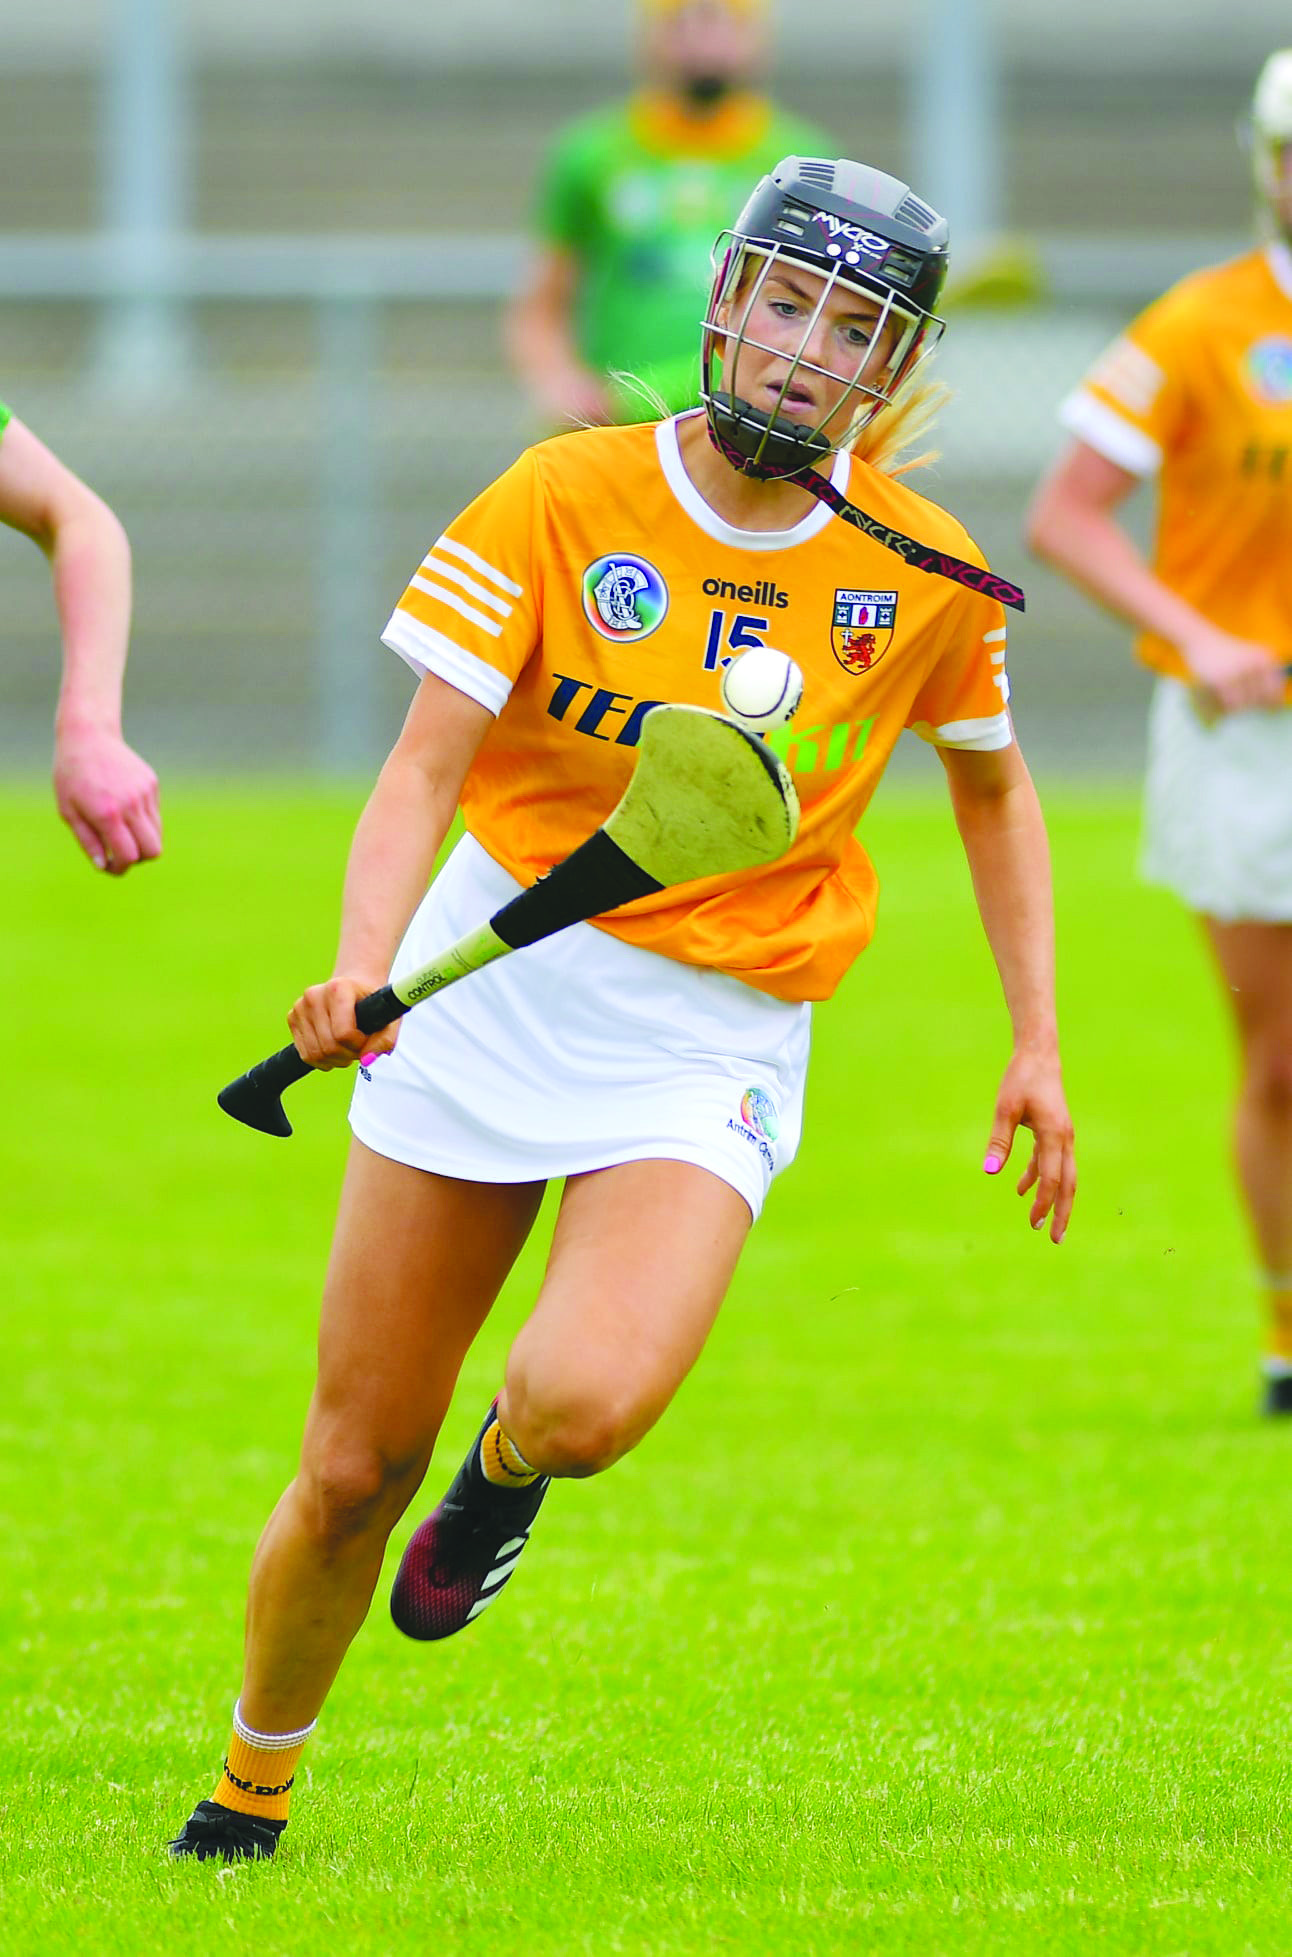 Caitrín Dobbin struck for the decisive goal to secure victory for Antrim over Down earlier in the campaign